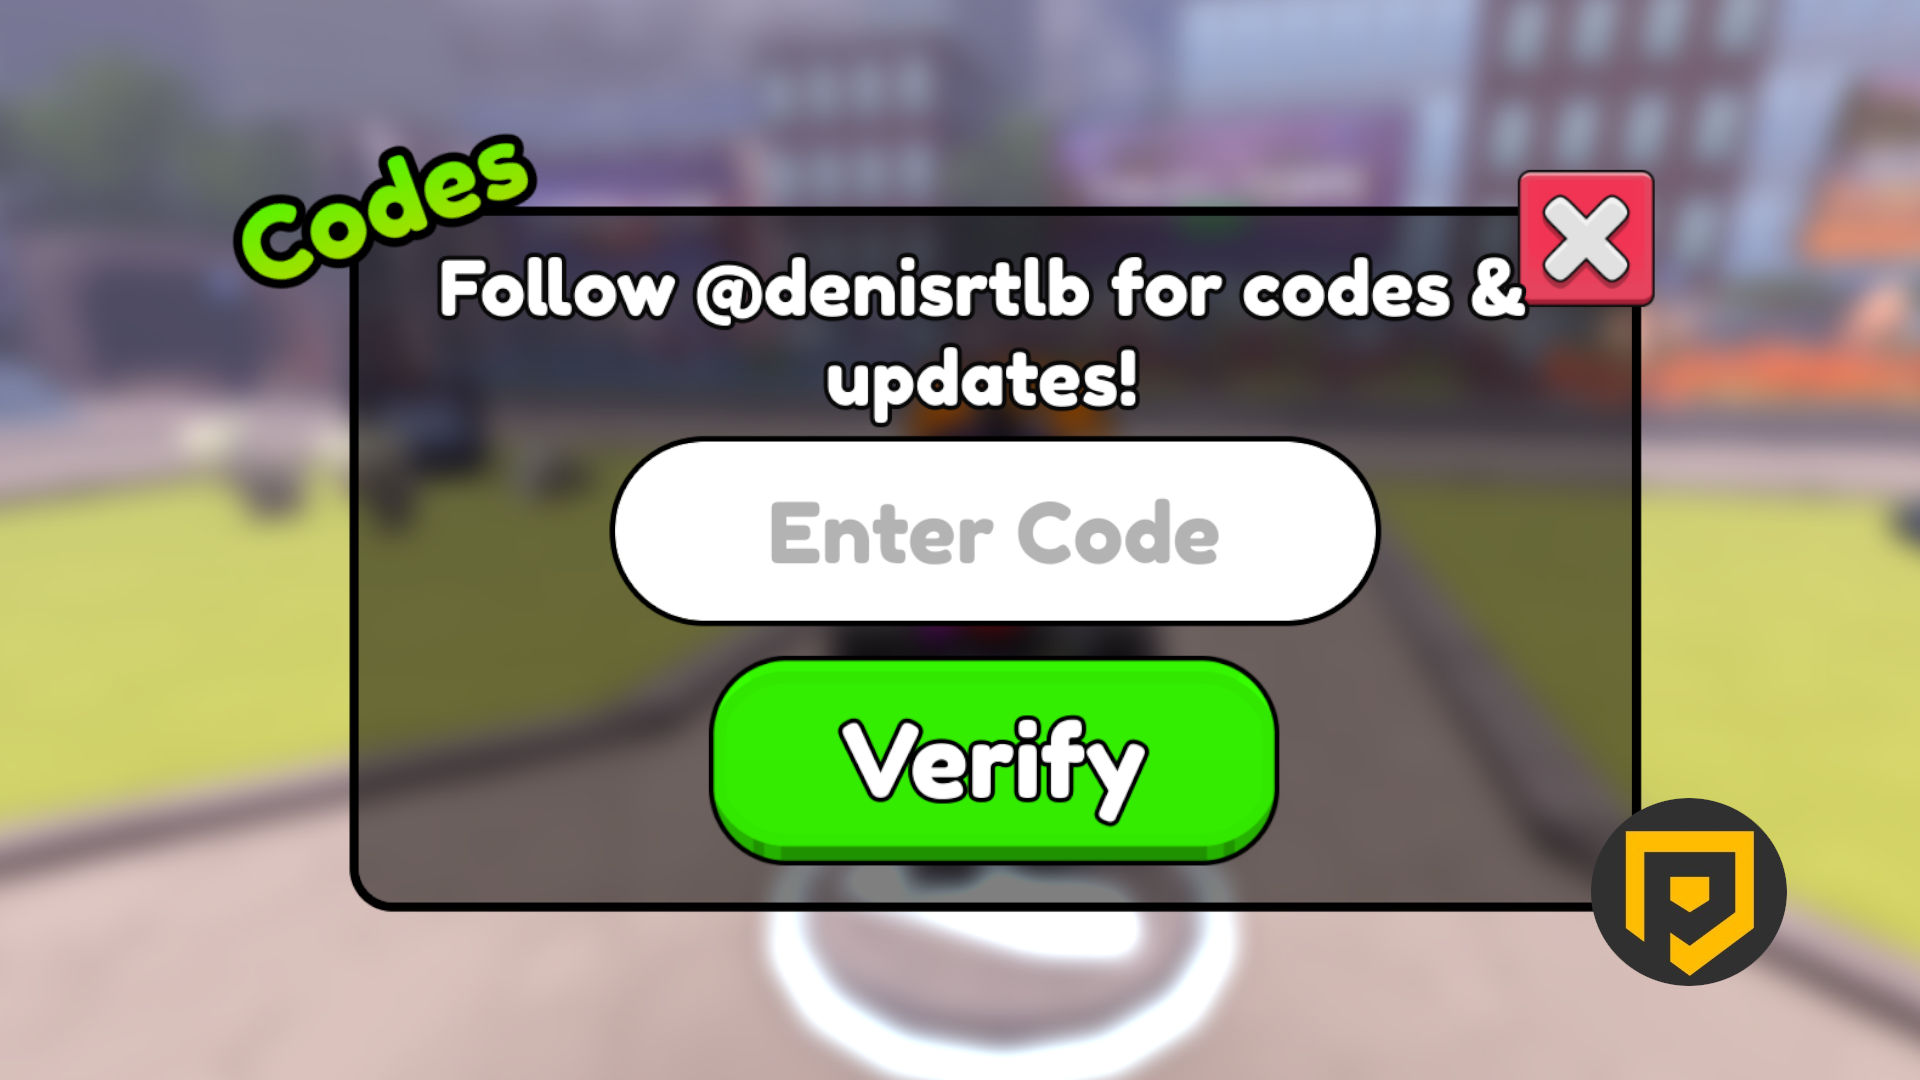 How To REDEEM Codes In Toilet Tower Defense (Full Guide) 